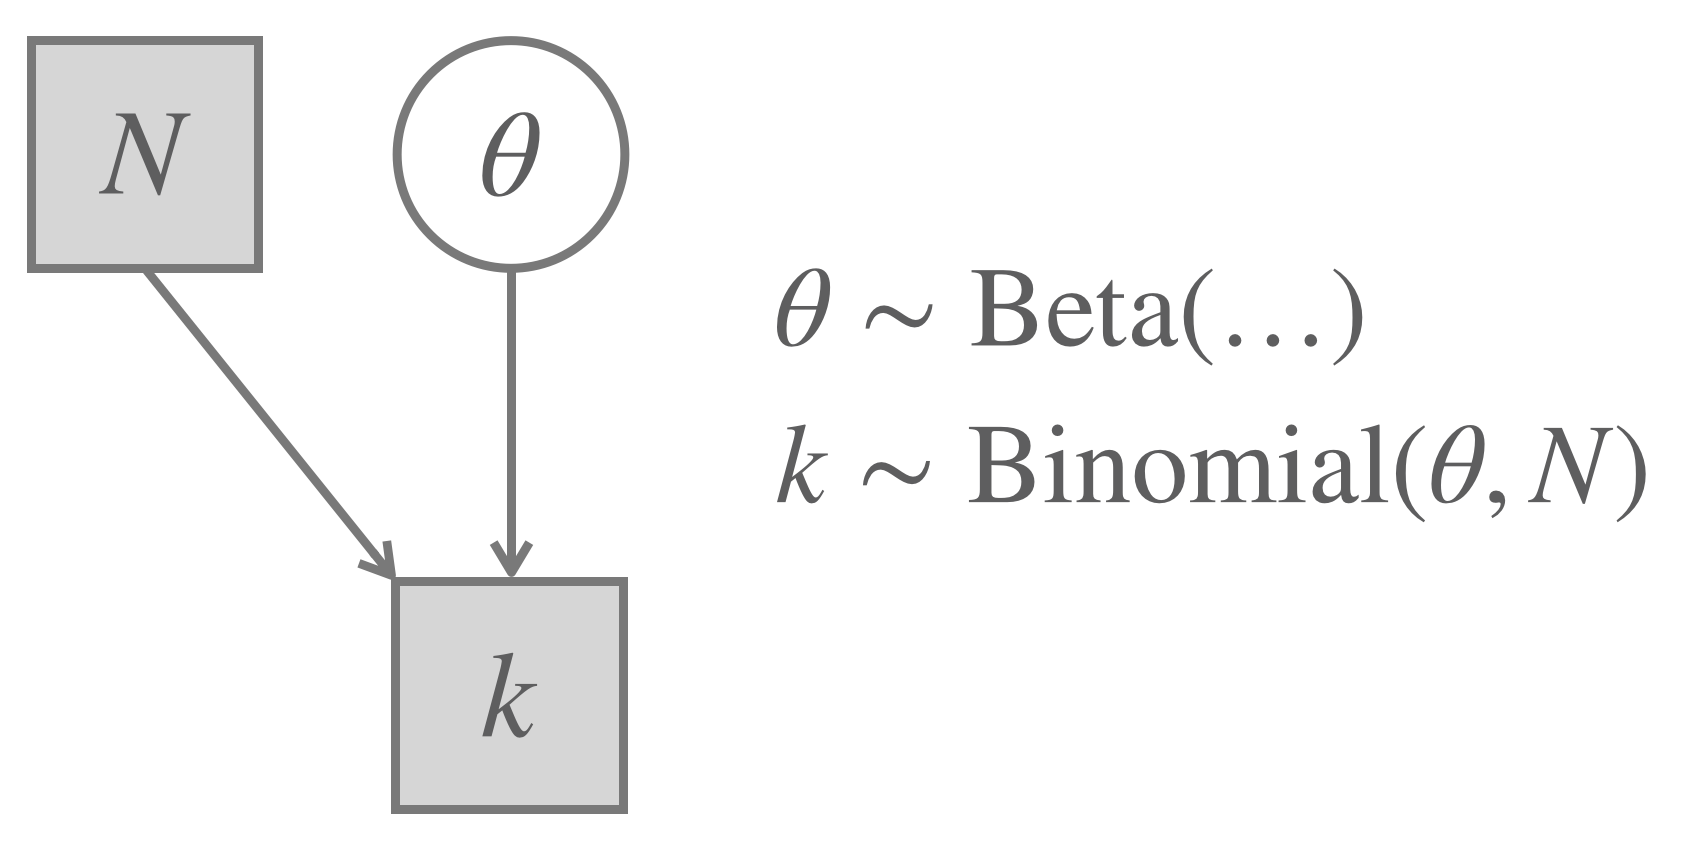 The Binomial Model (repeated from before) for a Bayesian approach to parameter inference/testing.